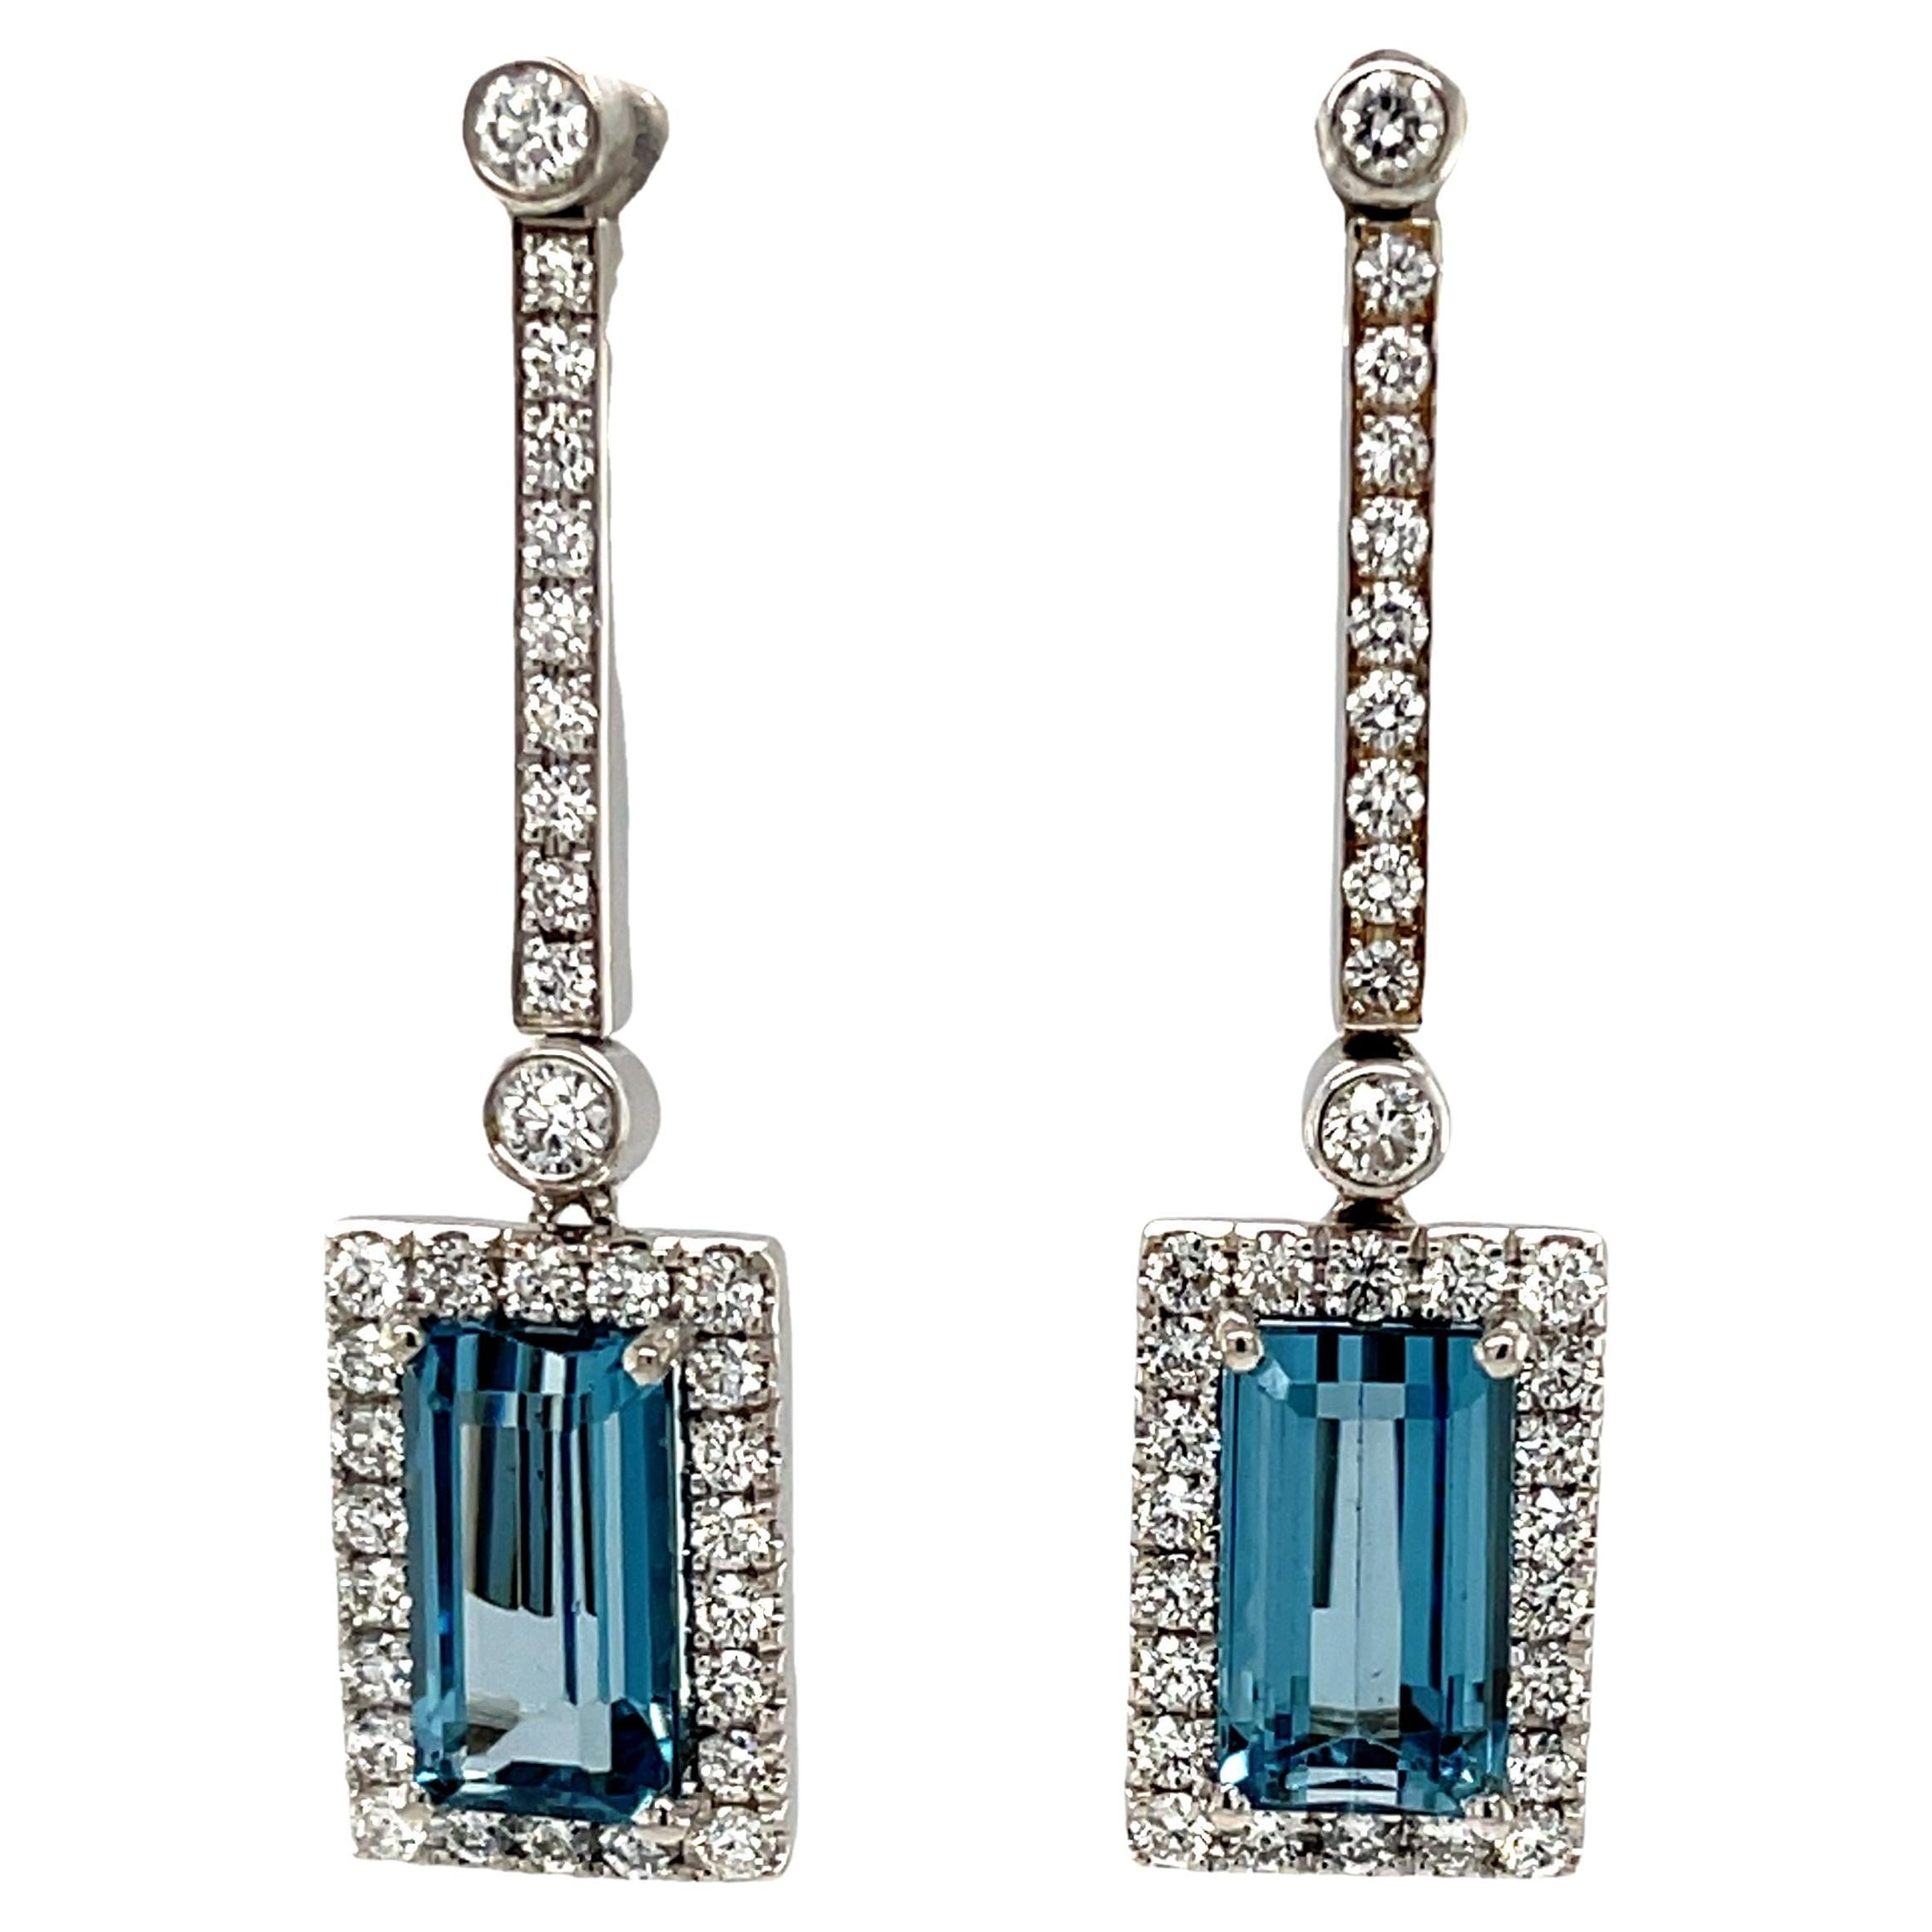 These wonderfully versatile earrings feature gorgeous aquamarine and diamond “drops” suspended from an elegant line of sparkling diamonds! The perfectly matched emerald-cut gems are beautifully crystalline with exceptionally bright, aquamarine blue